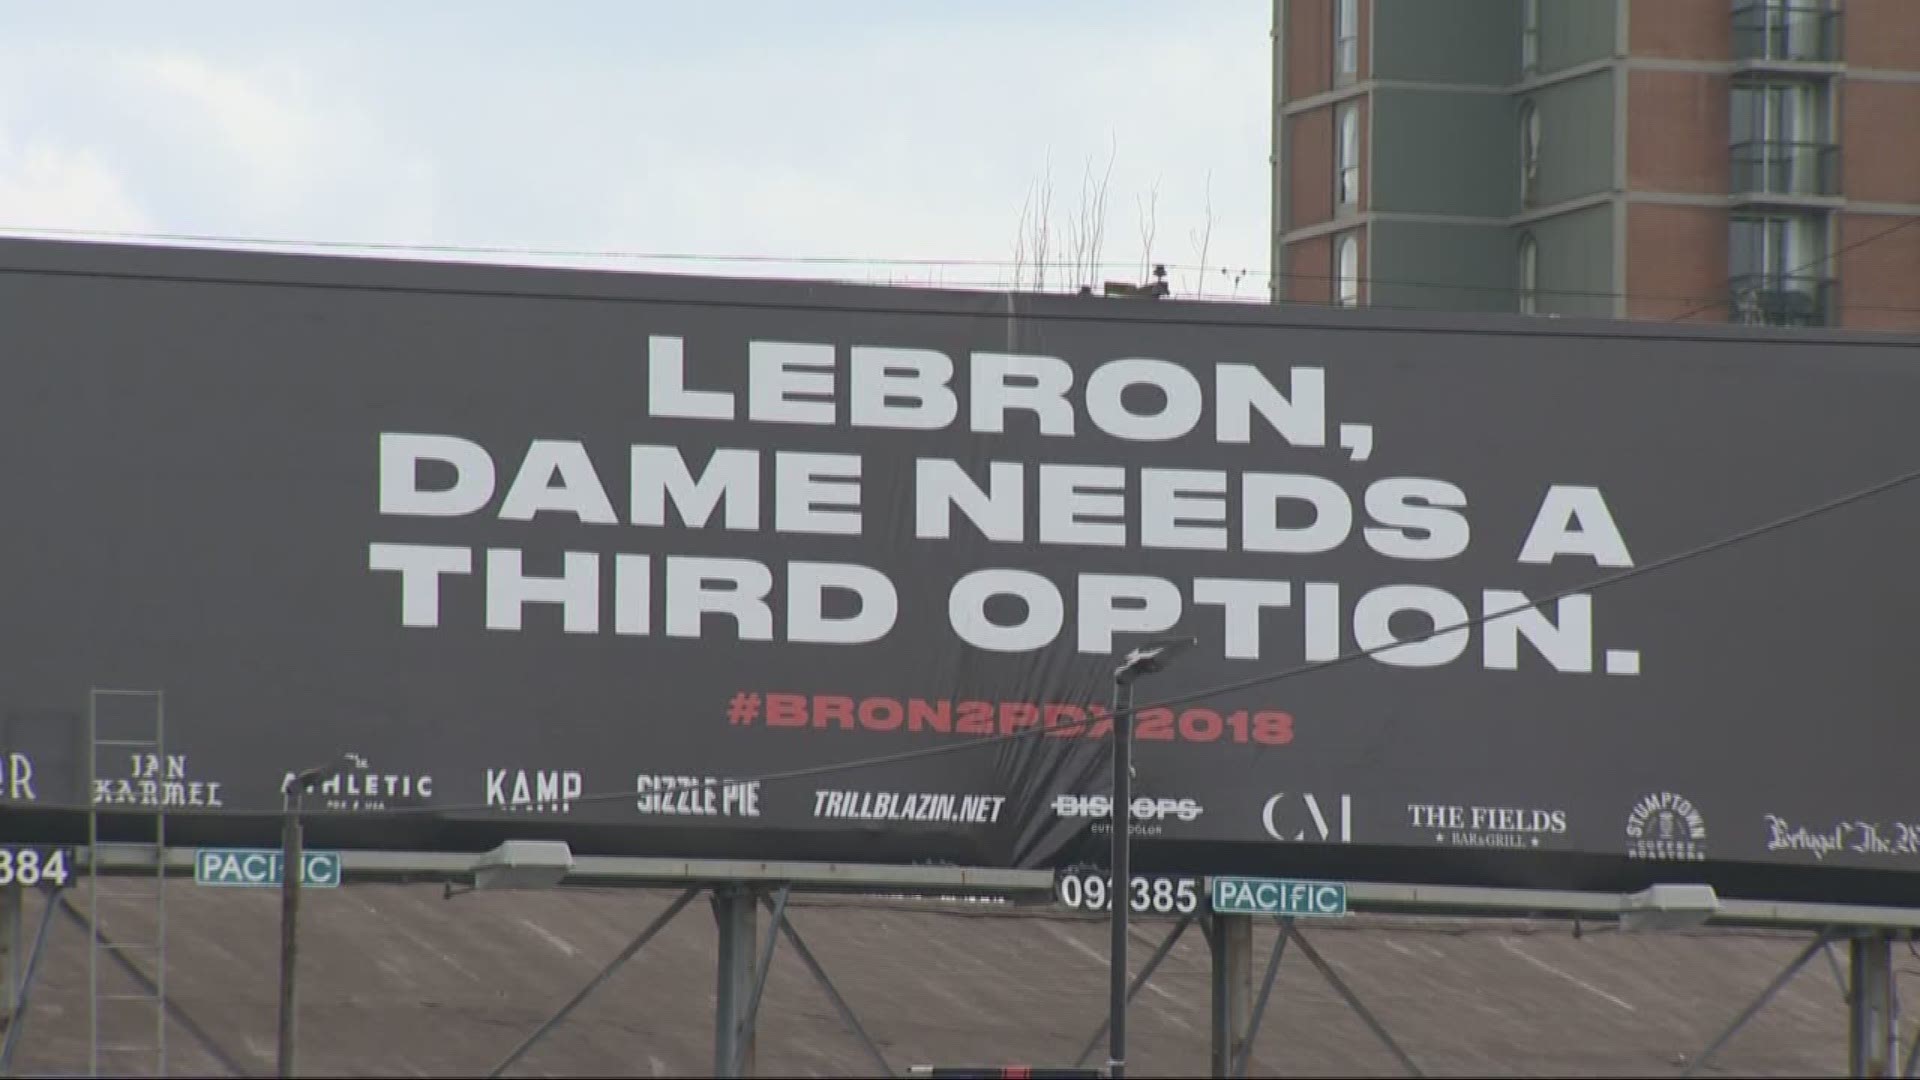 A Portland billboard is urging LeBron to take his talents to Portland.